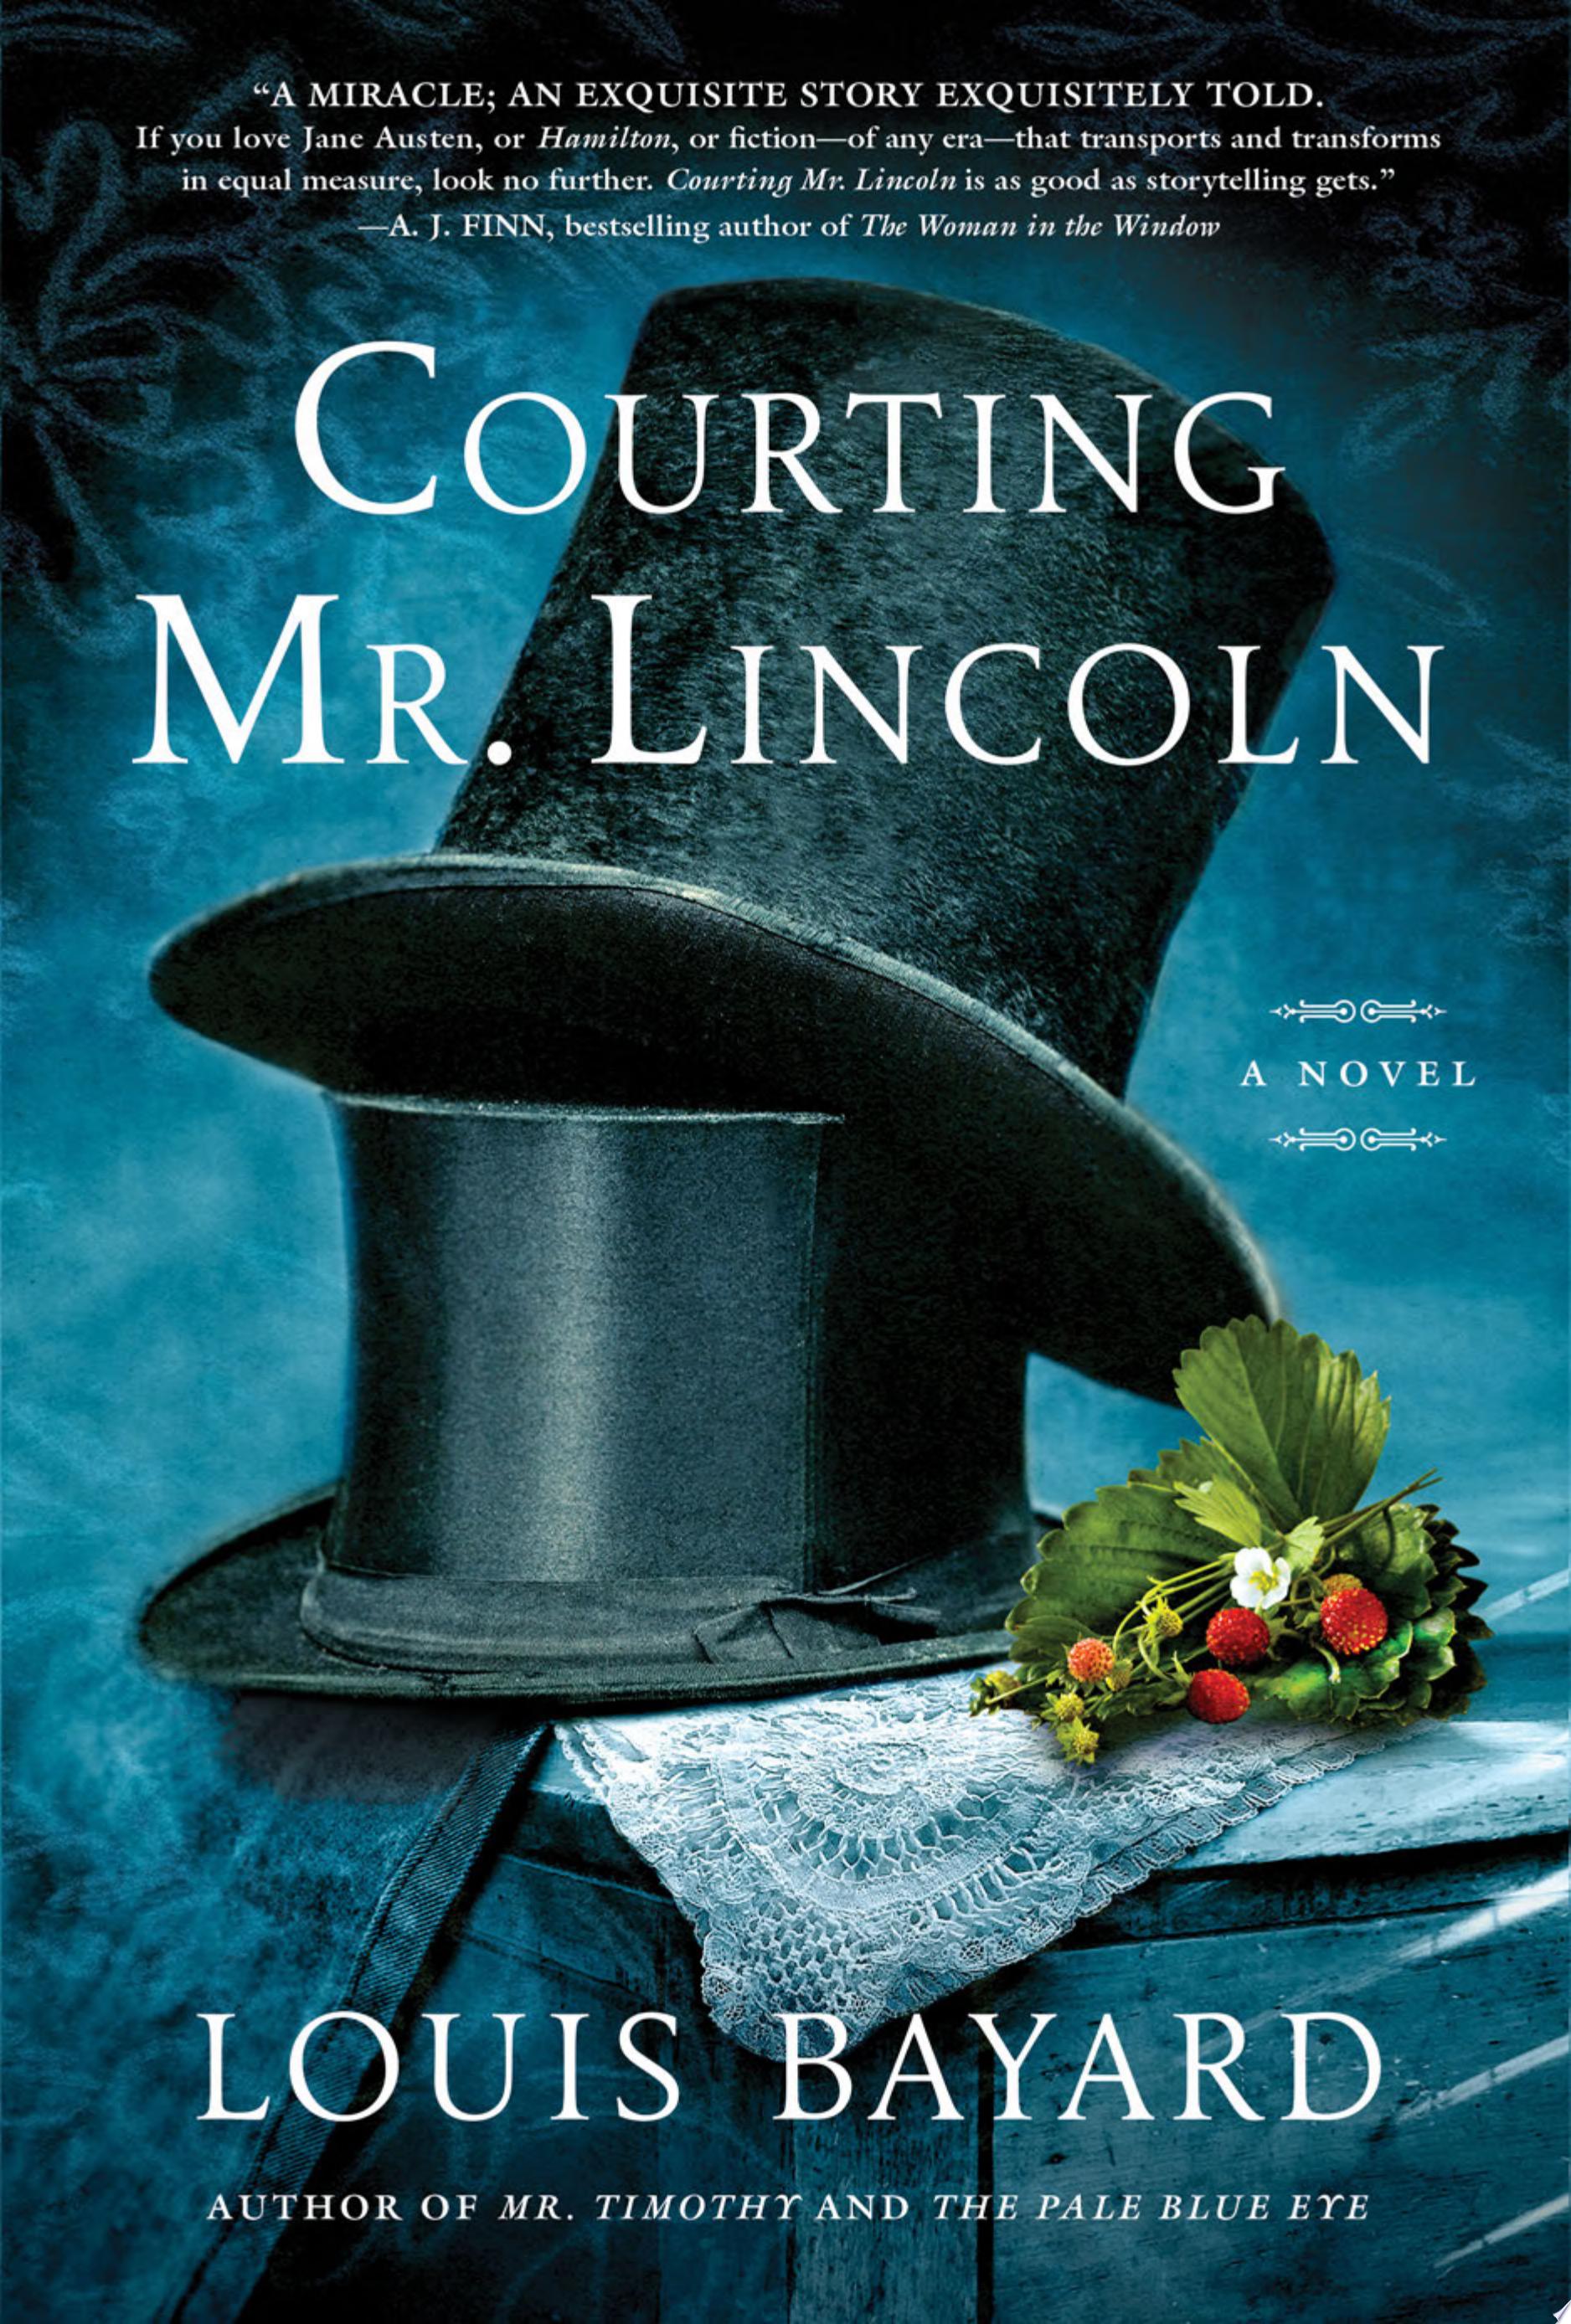 Image for "Courting Mr. Lincoln"